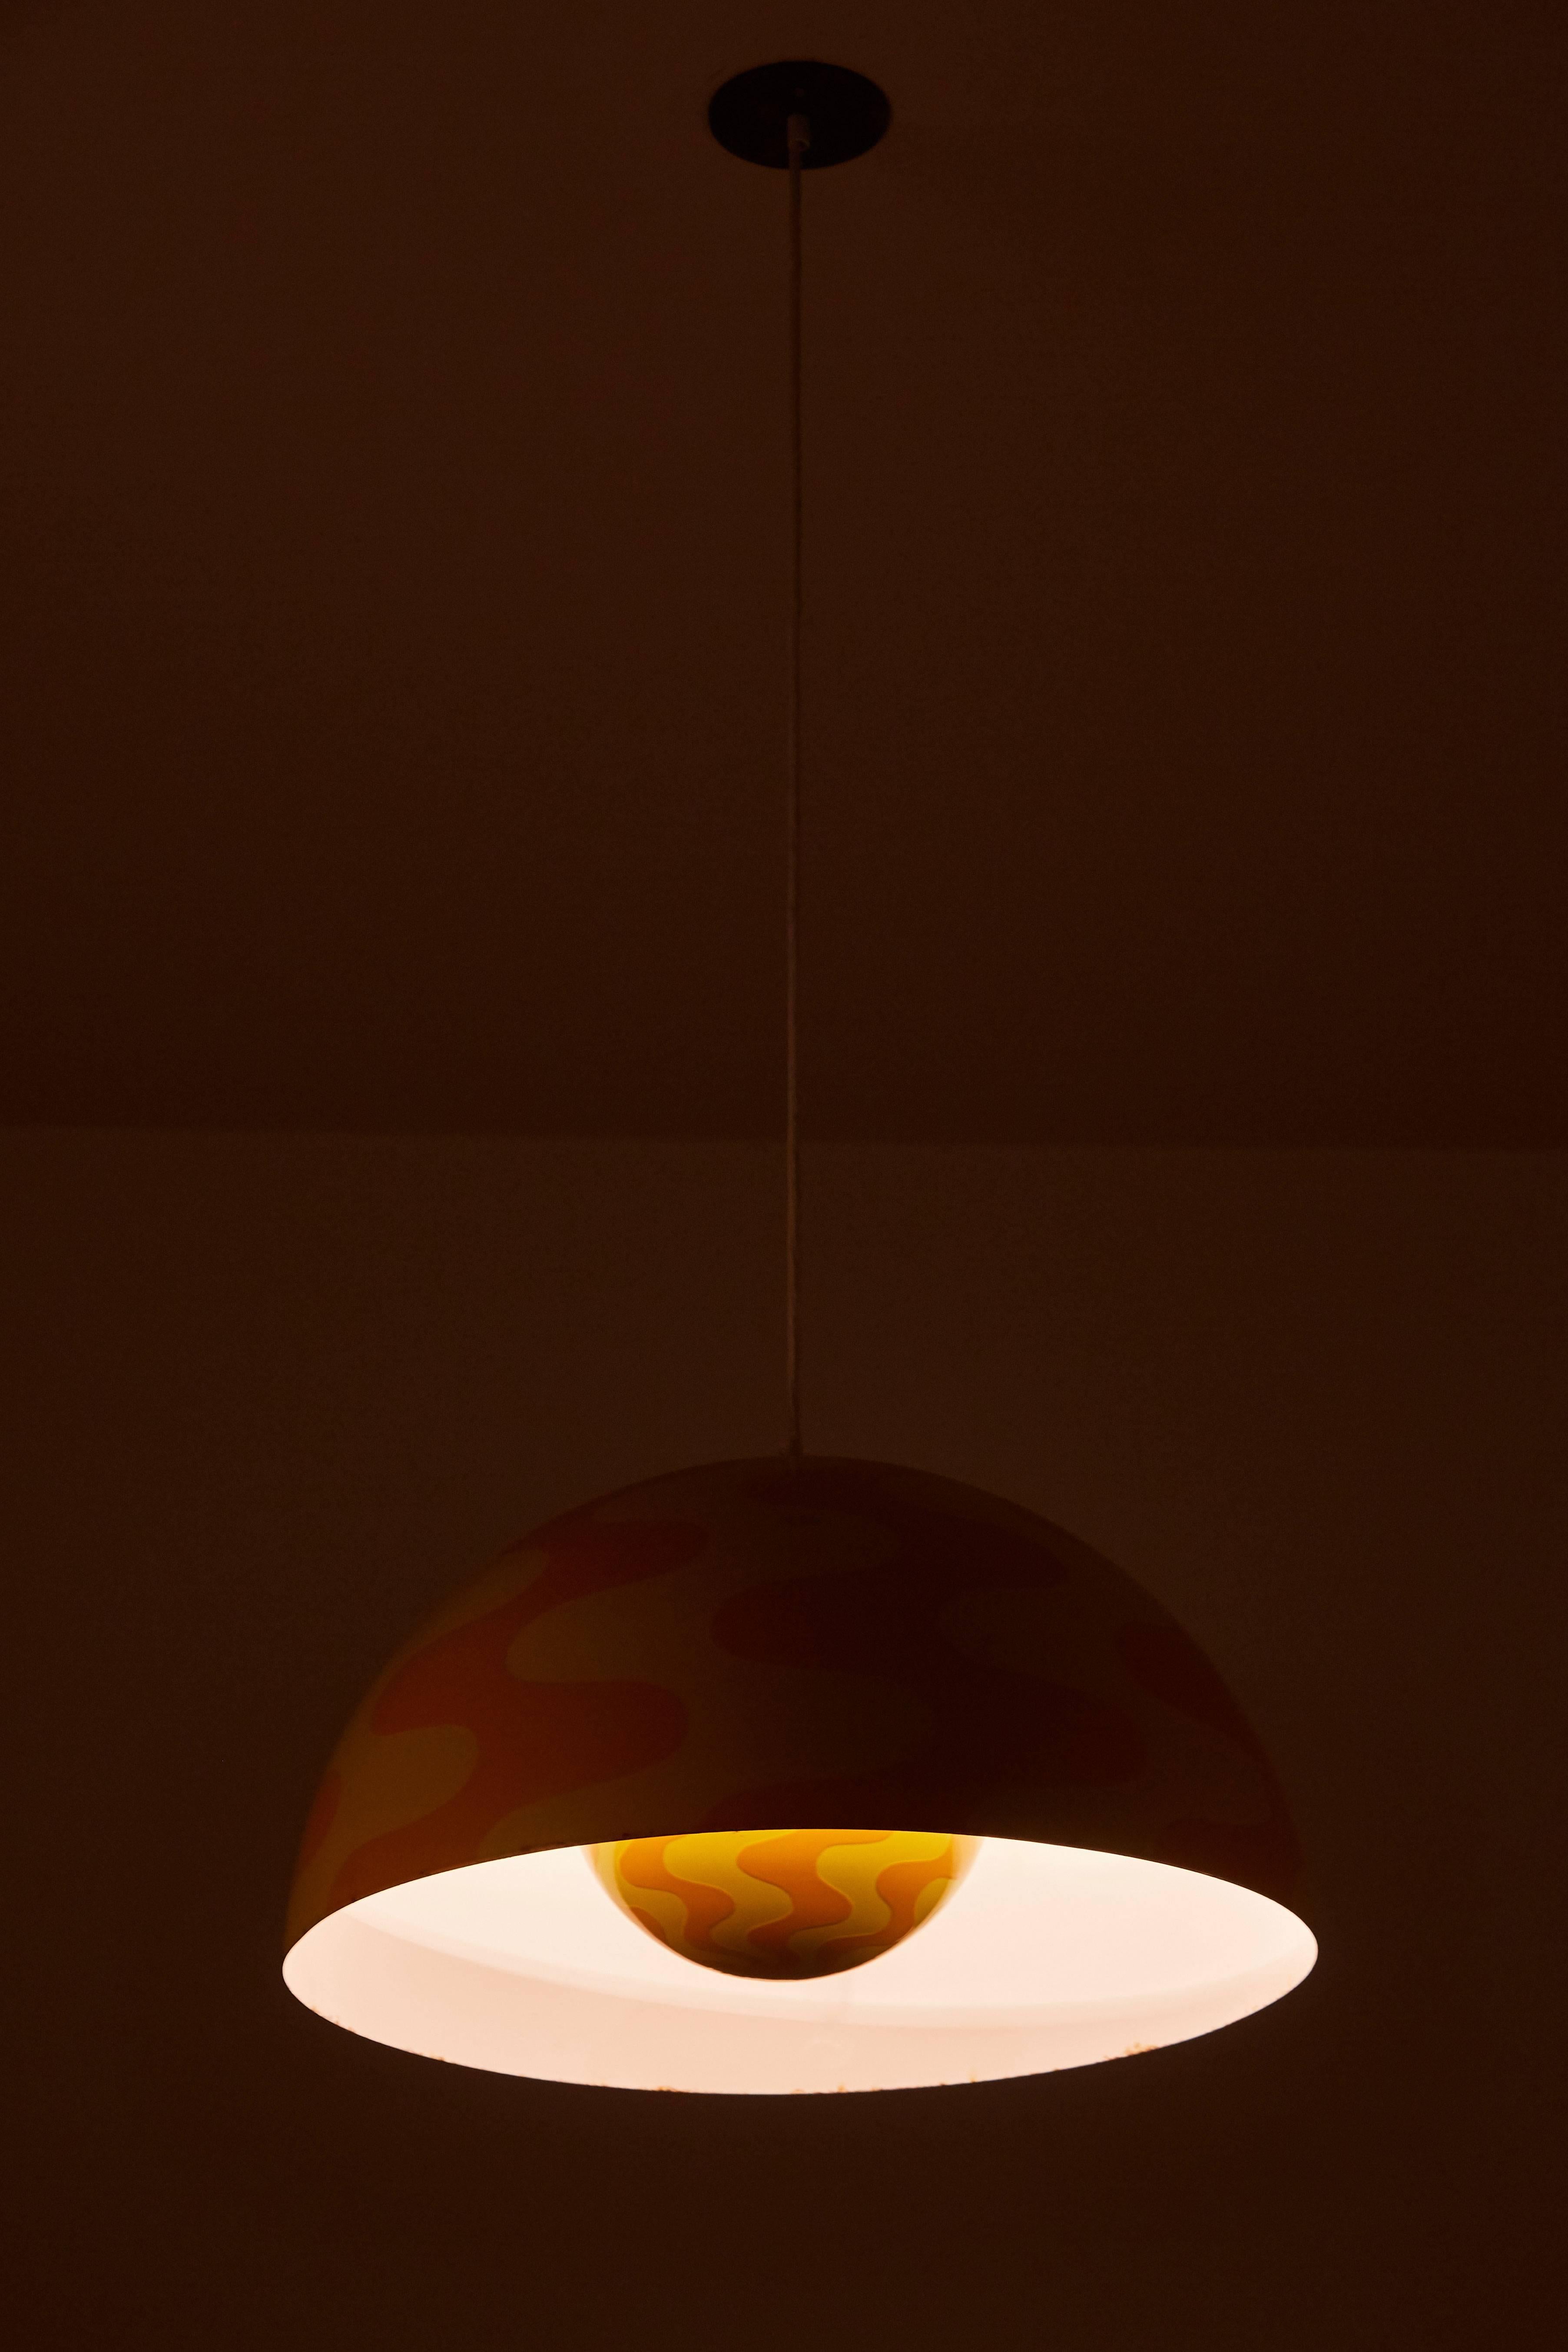 Rare large pendant with two diffusers, yellow and orange enameled pattern. Limited edition. Designed by Verner Panton for Louis Poulsen in 1971. Custom canopy. Wired for US junction boxes. Takes one E27 100w maximum bulb. Literature: Verner Panton -